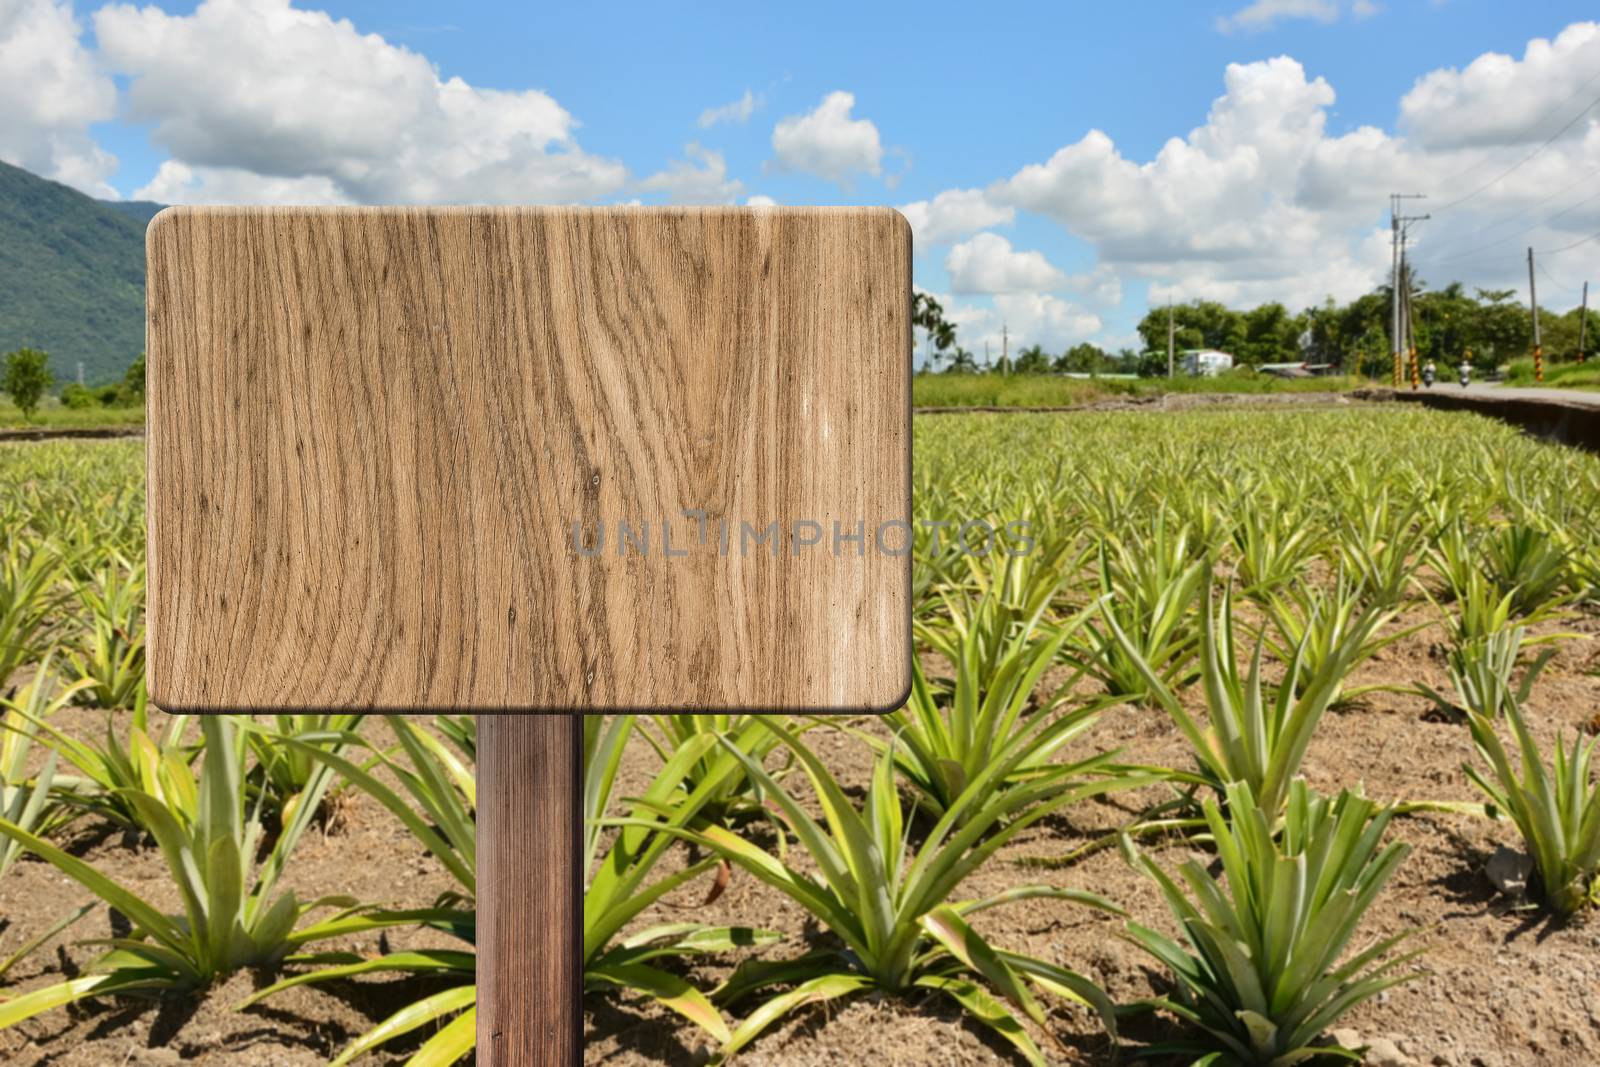 Blank wooden sign on field of pineapplef arm. Concept of rural, idyllic, tranquility etc.